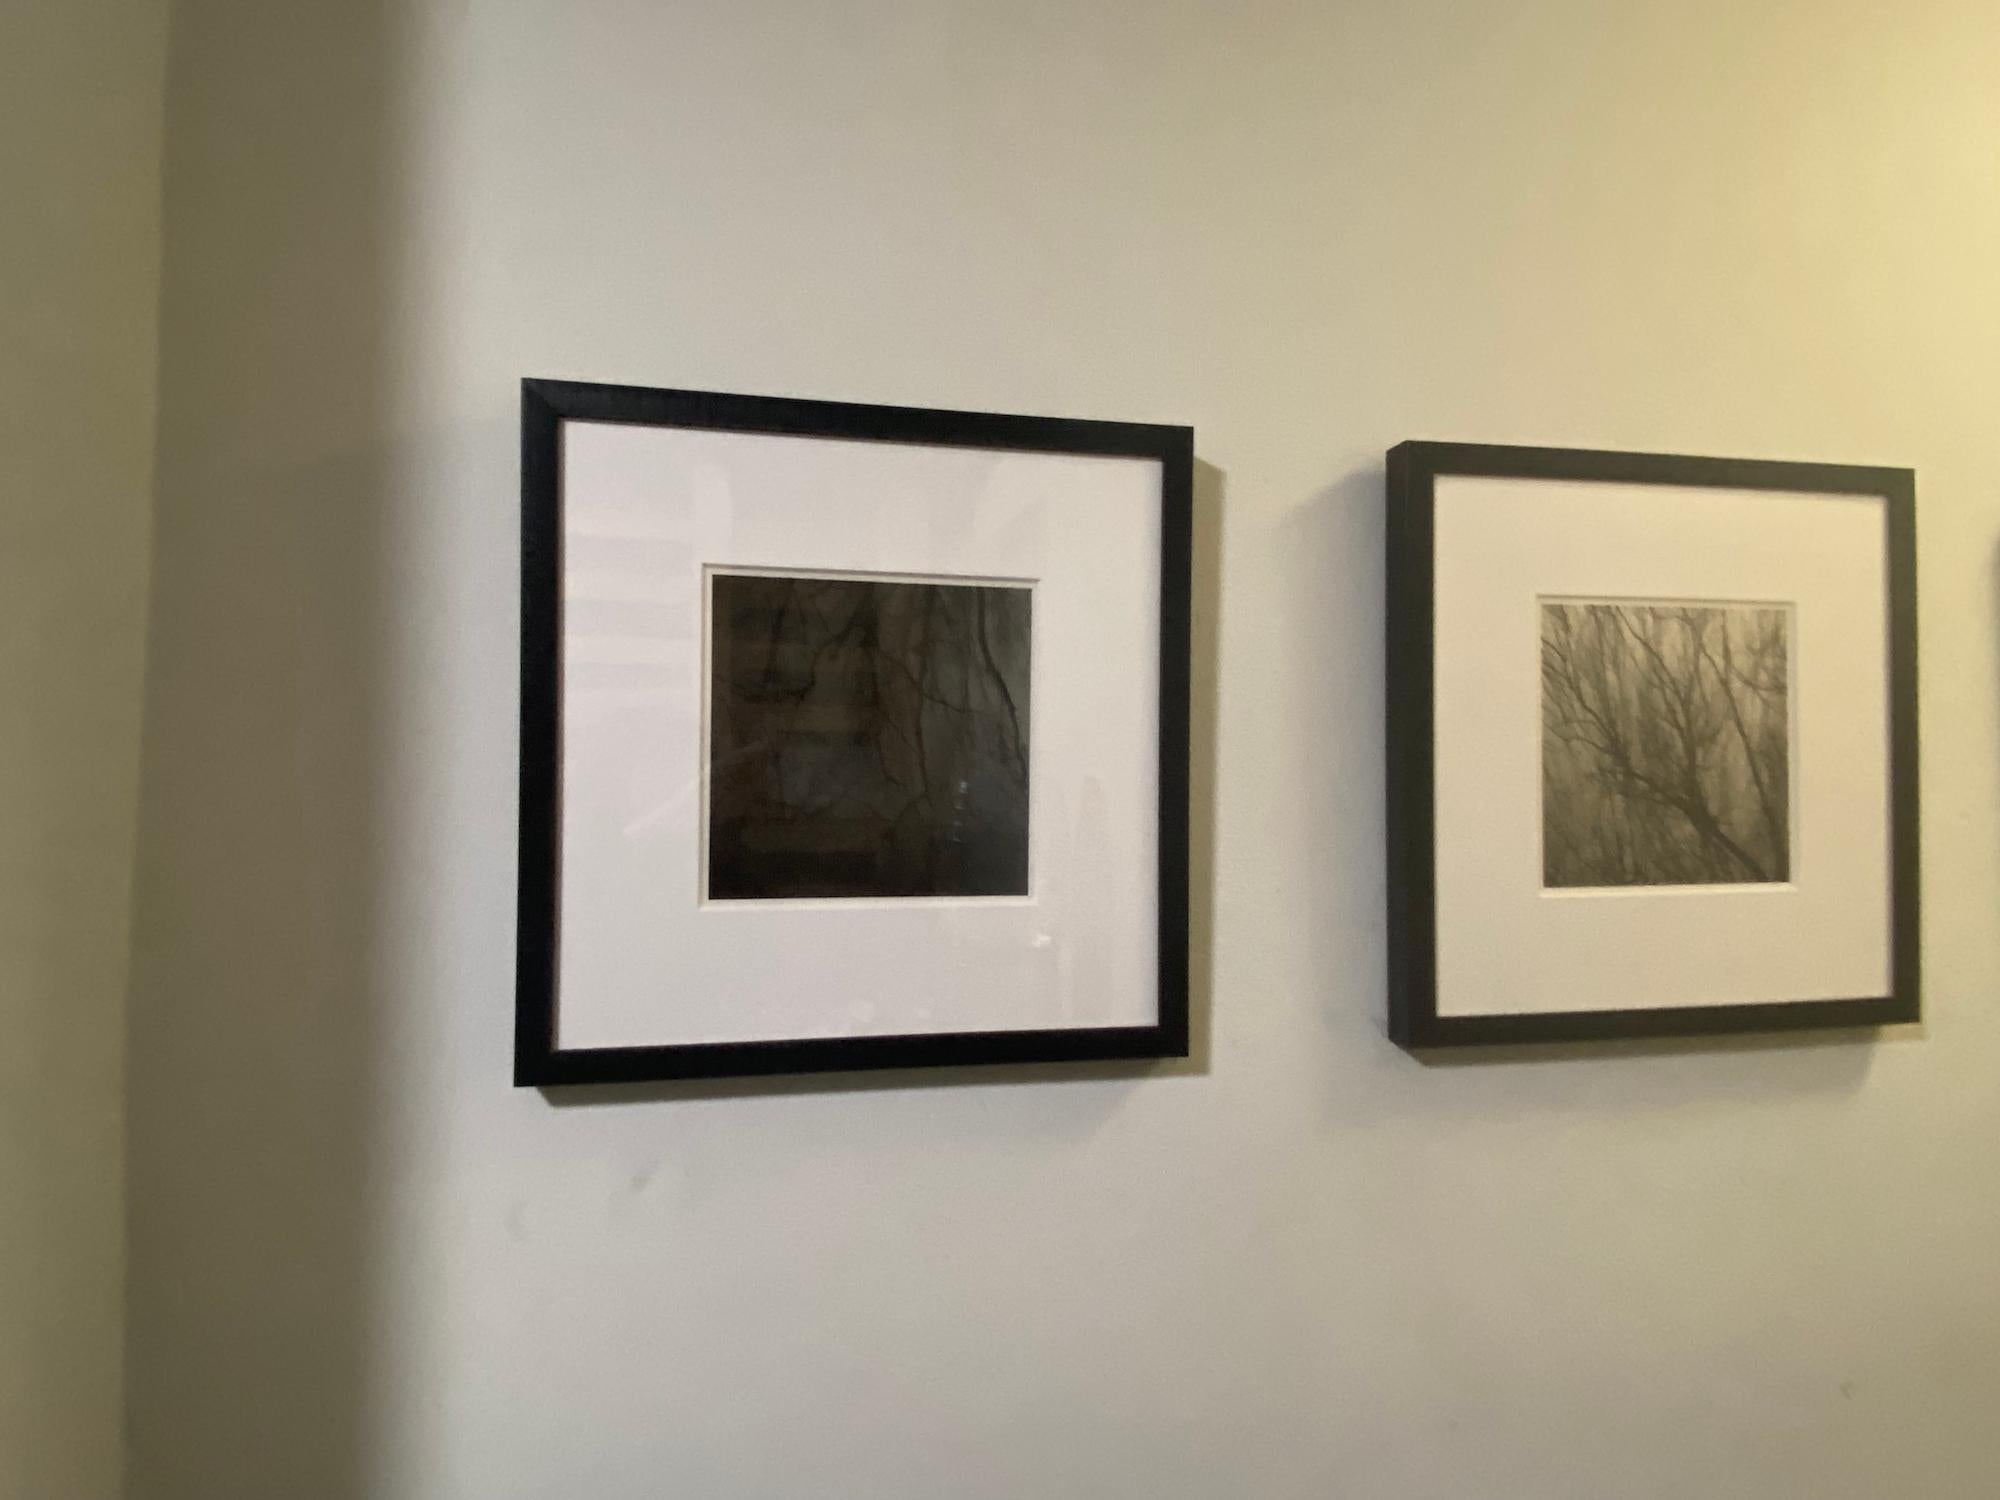 Entanglement #1 (The Embrace) - FRAMED black &white contemporary film photograph - Black Landscape Photograph by Kimberly Schneider Photography